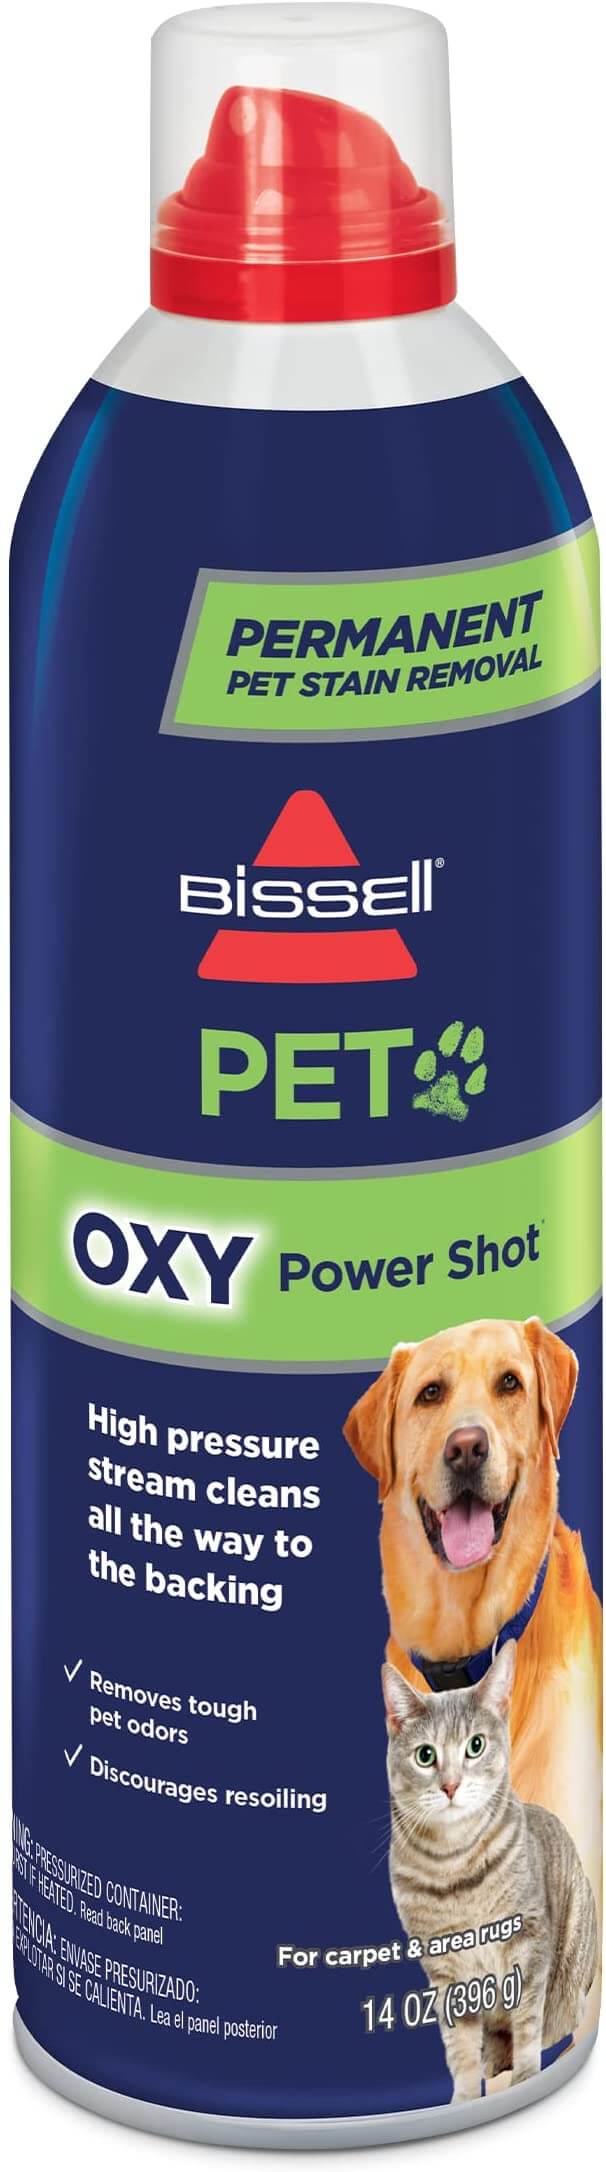 Bissell Pet Power Shot Oxy for Carpet